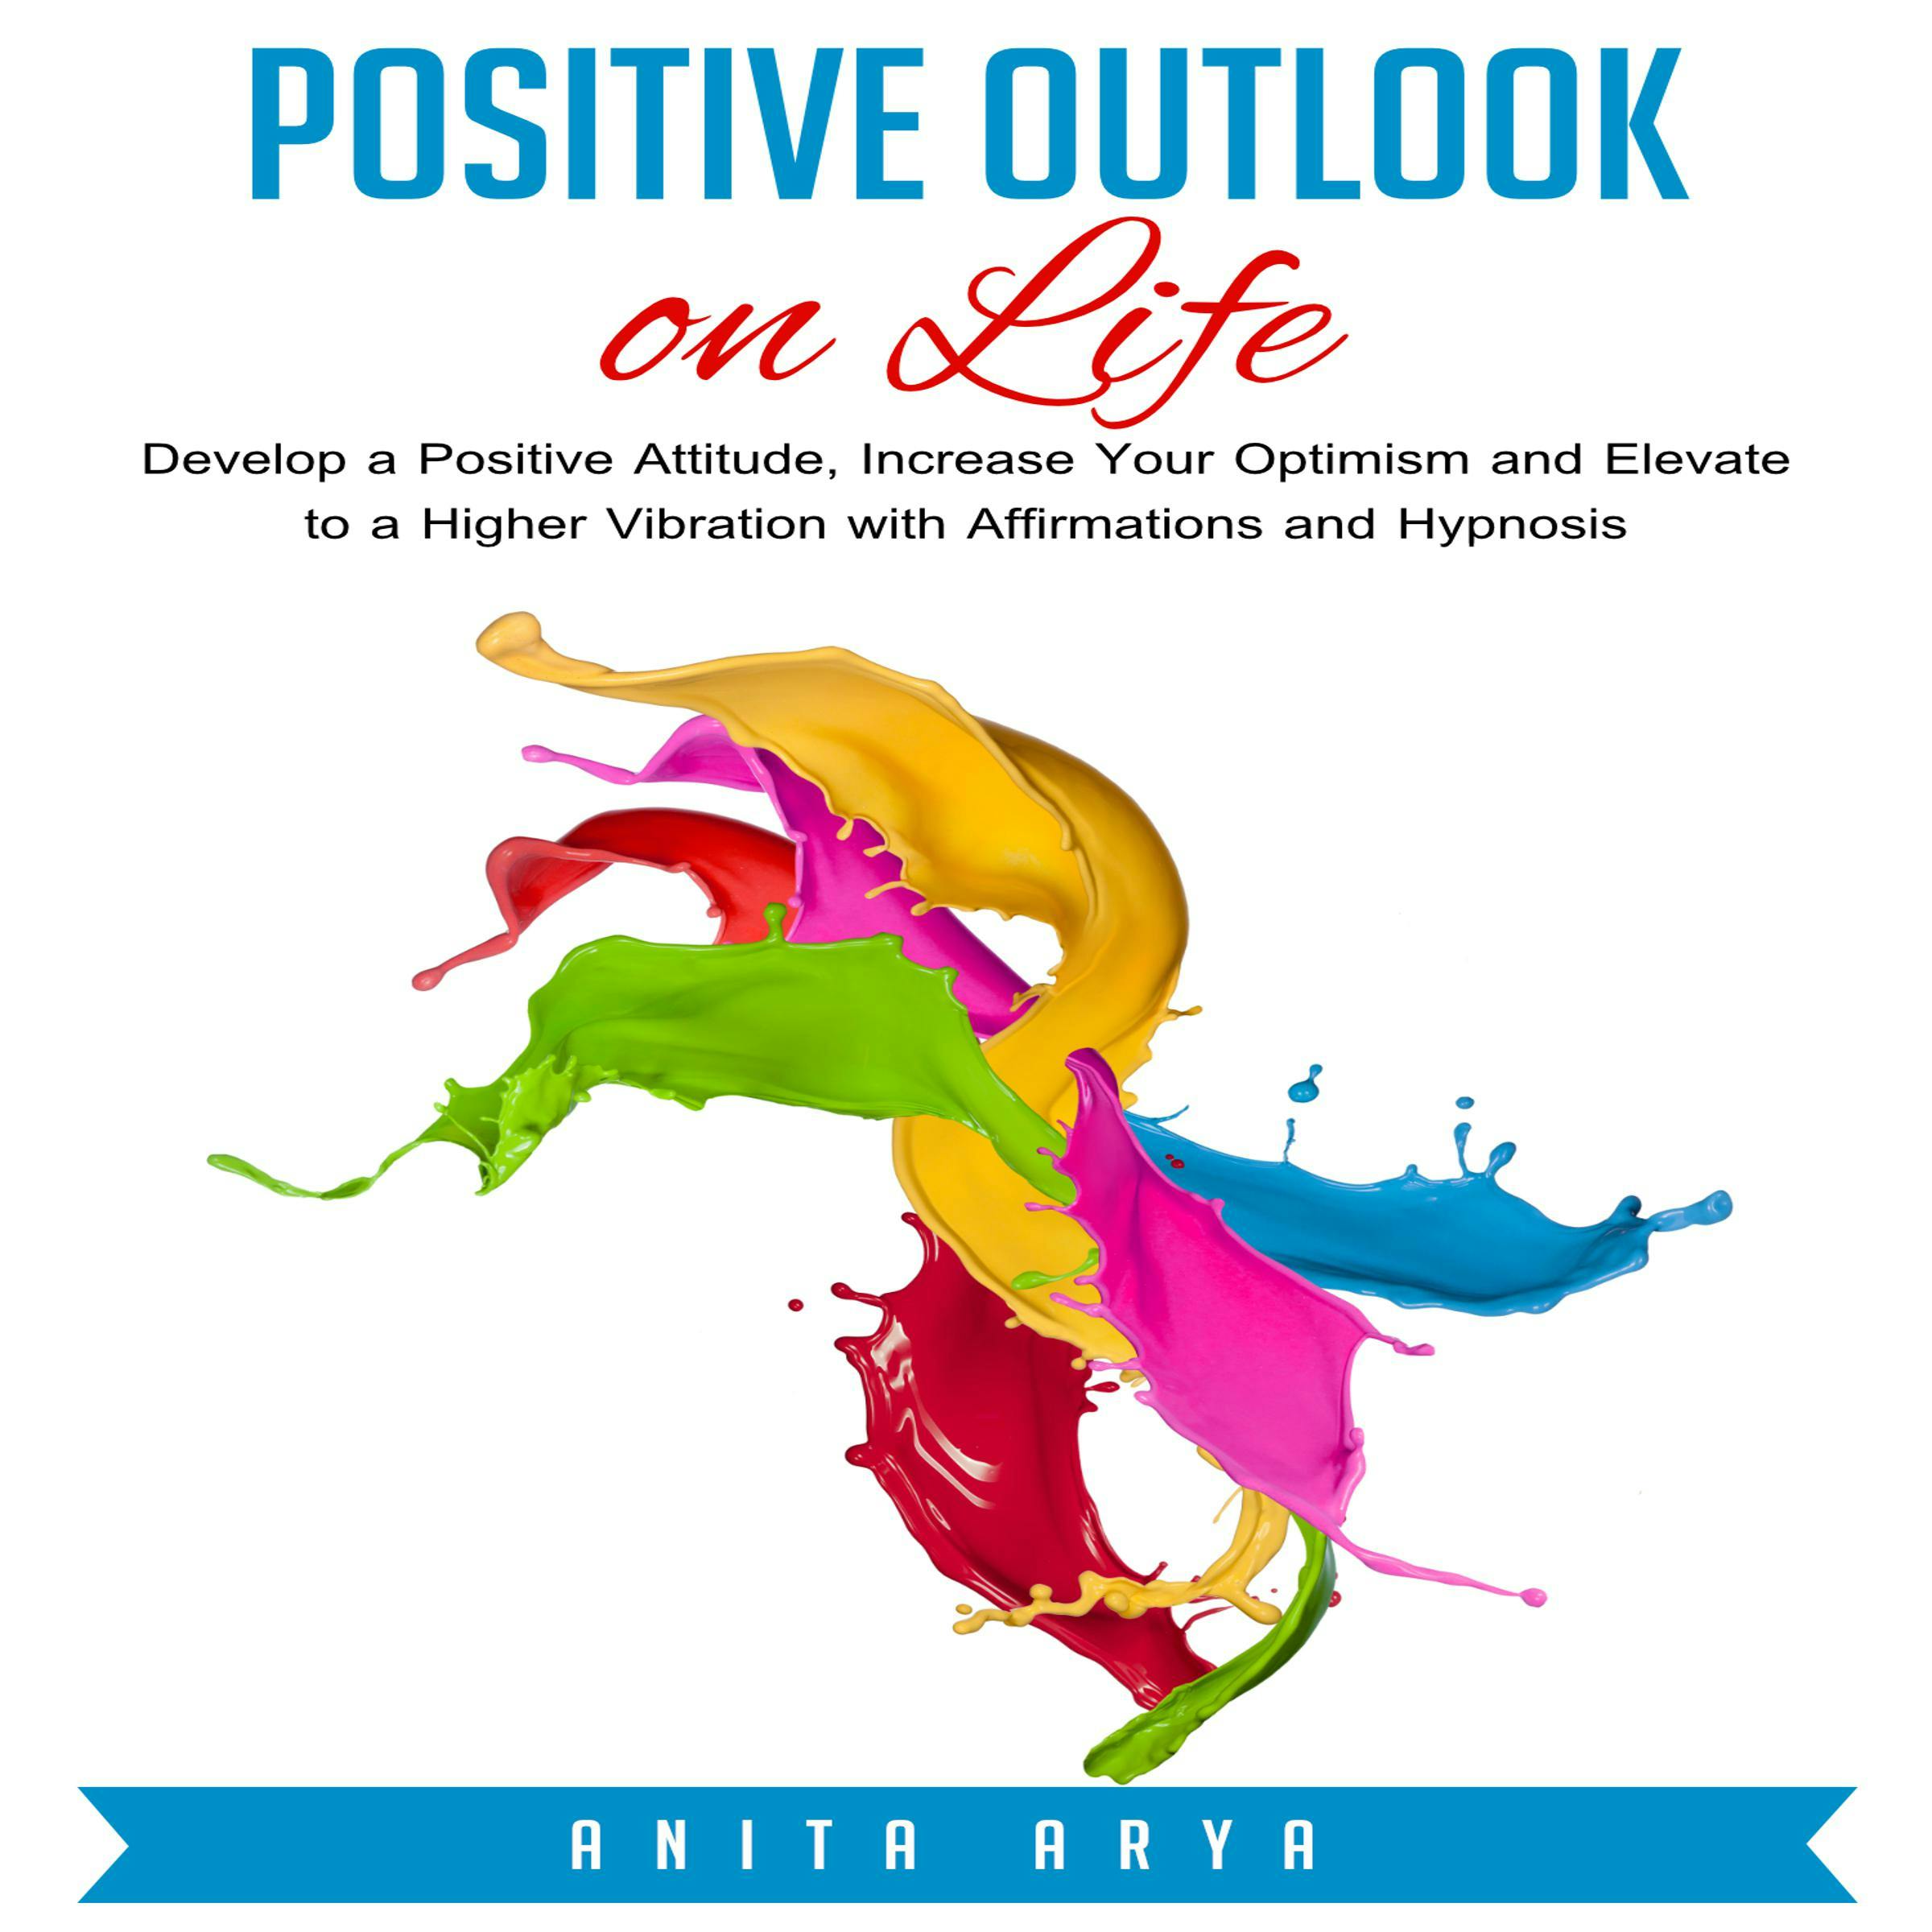 Positive Outlook on Life: Develop a Positive Attitude, Increase Your Optimism and Elevate to a Higher Vibration with Affirmations and Hypnosis - Anita Arya